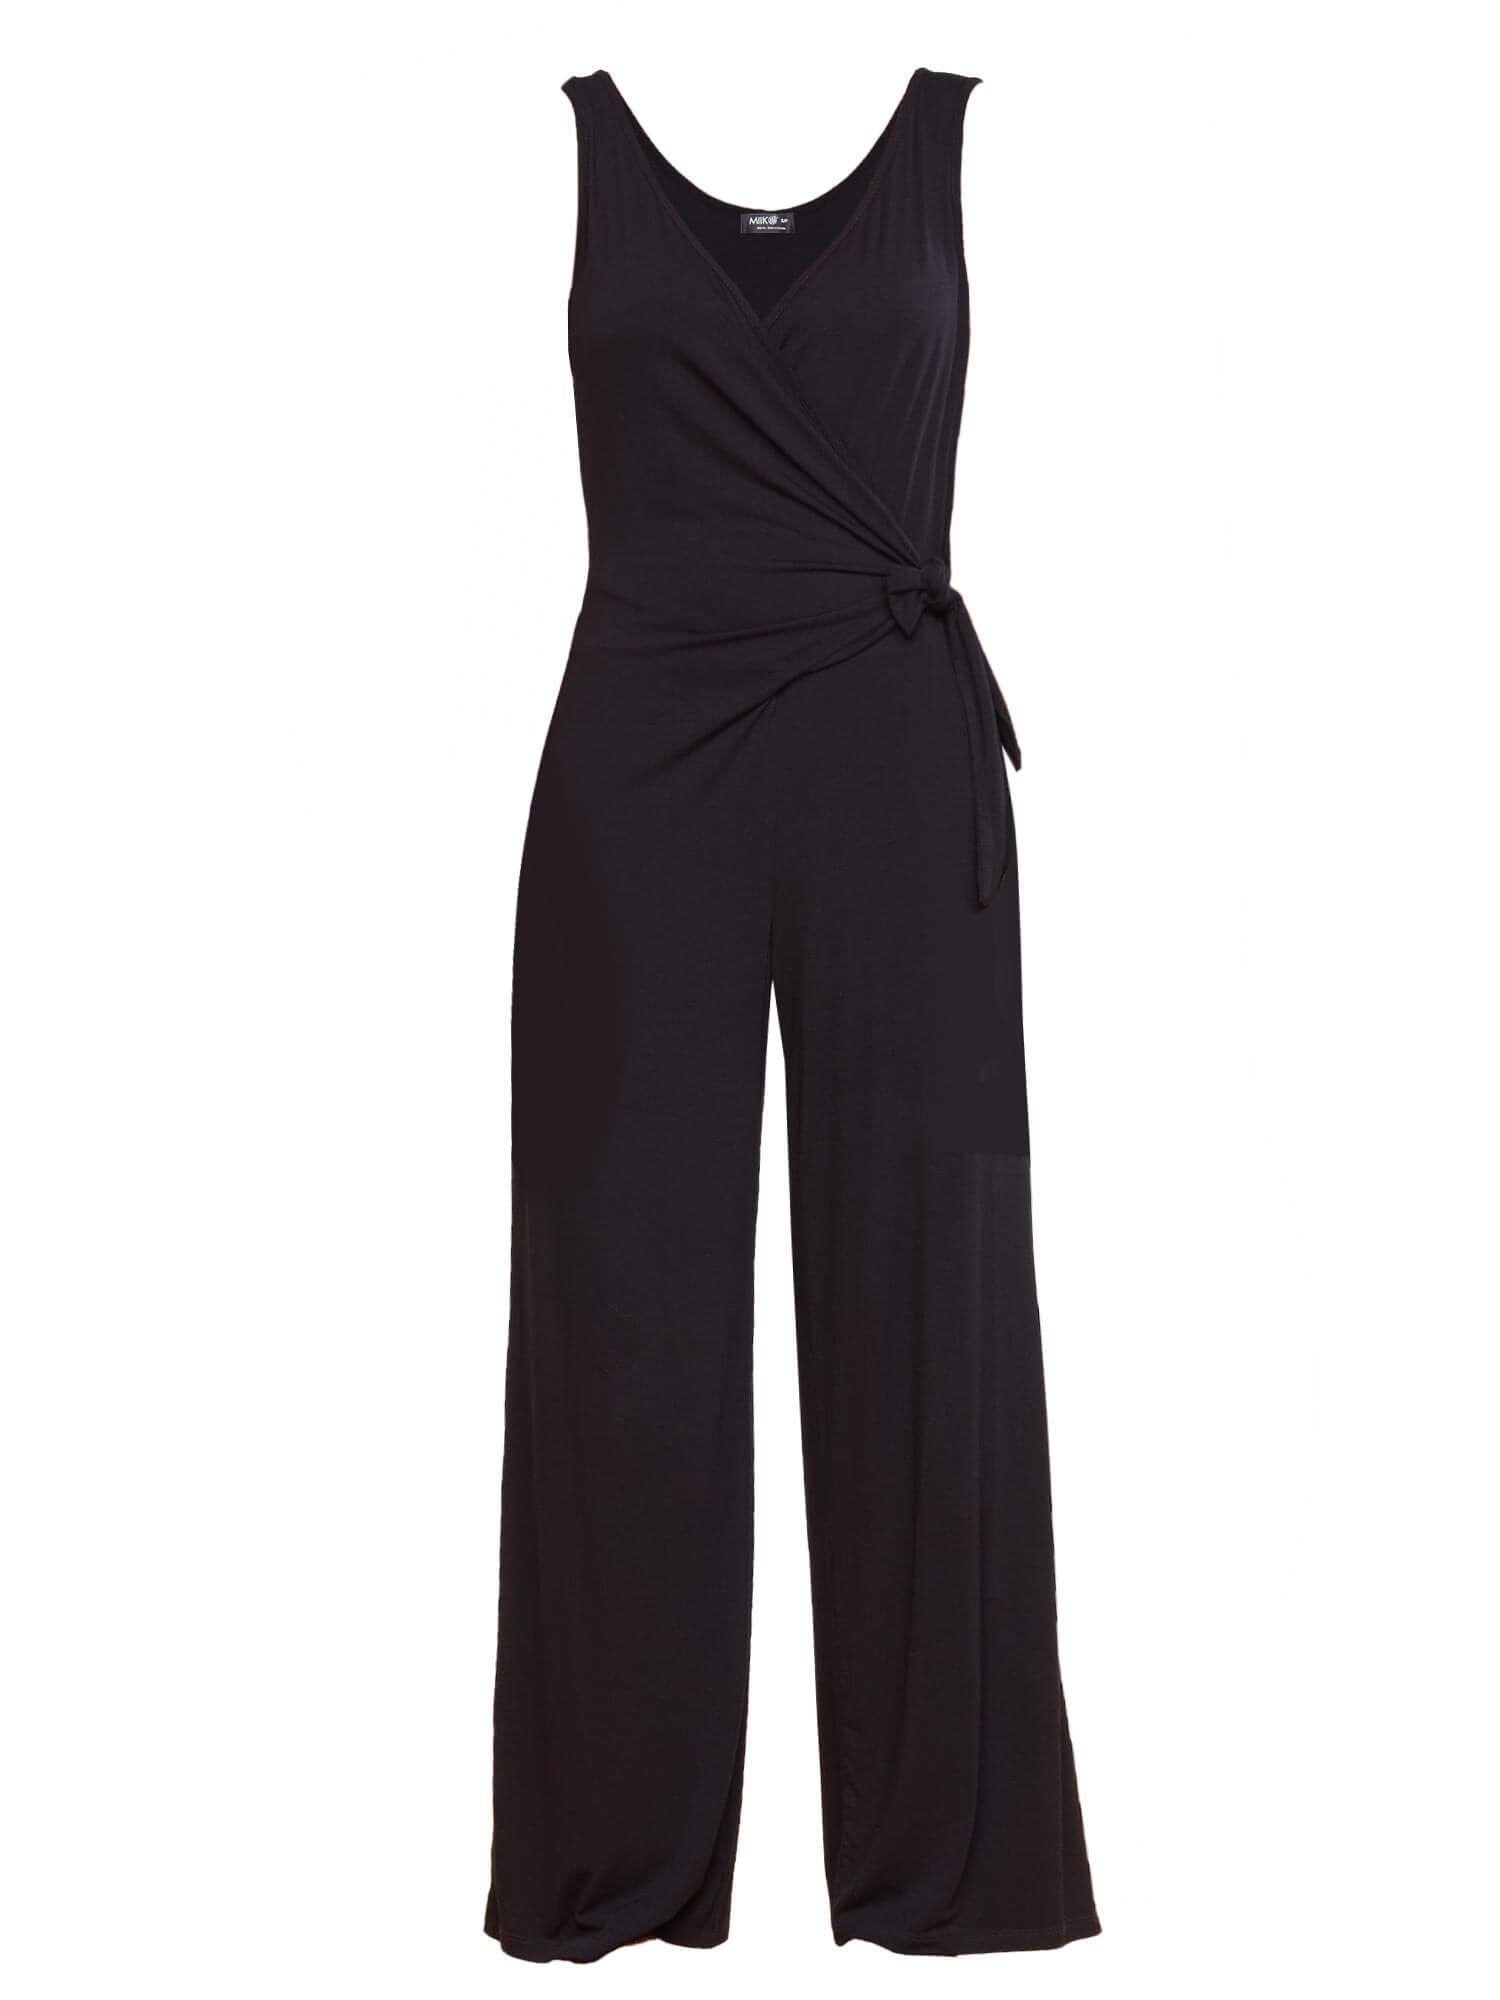 Blakely side-tie dressy jumpsuit | Sustainable women's fashion made in ...